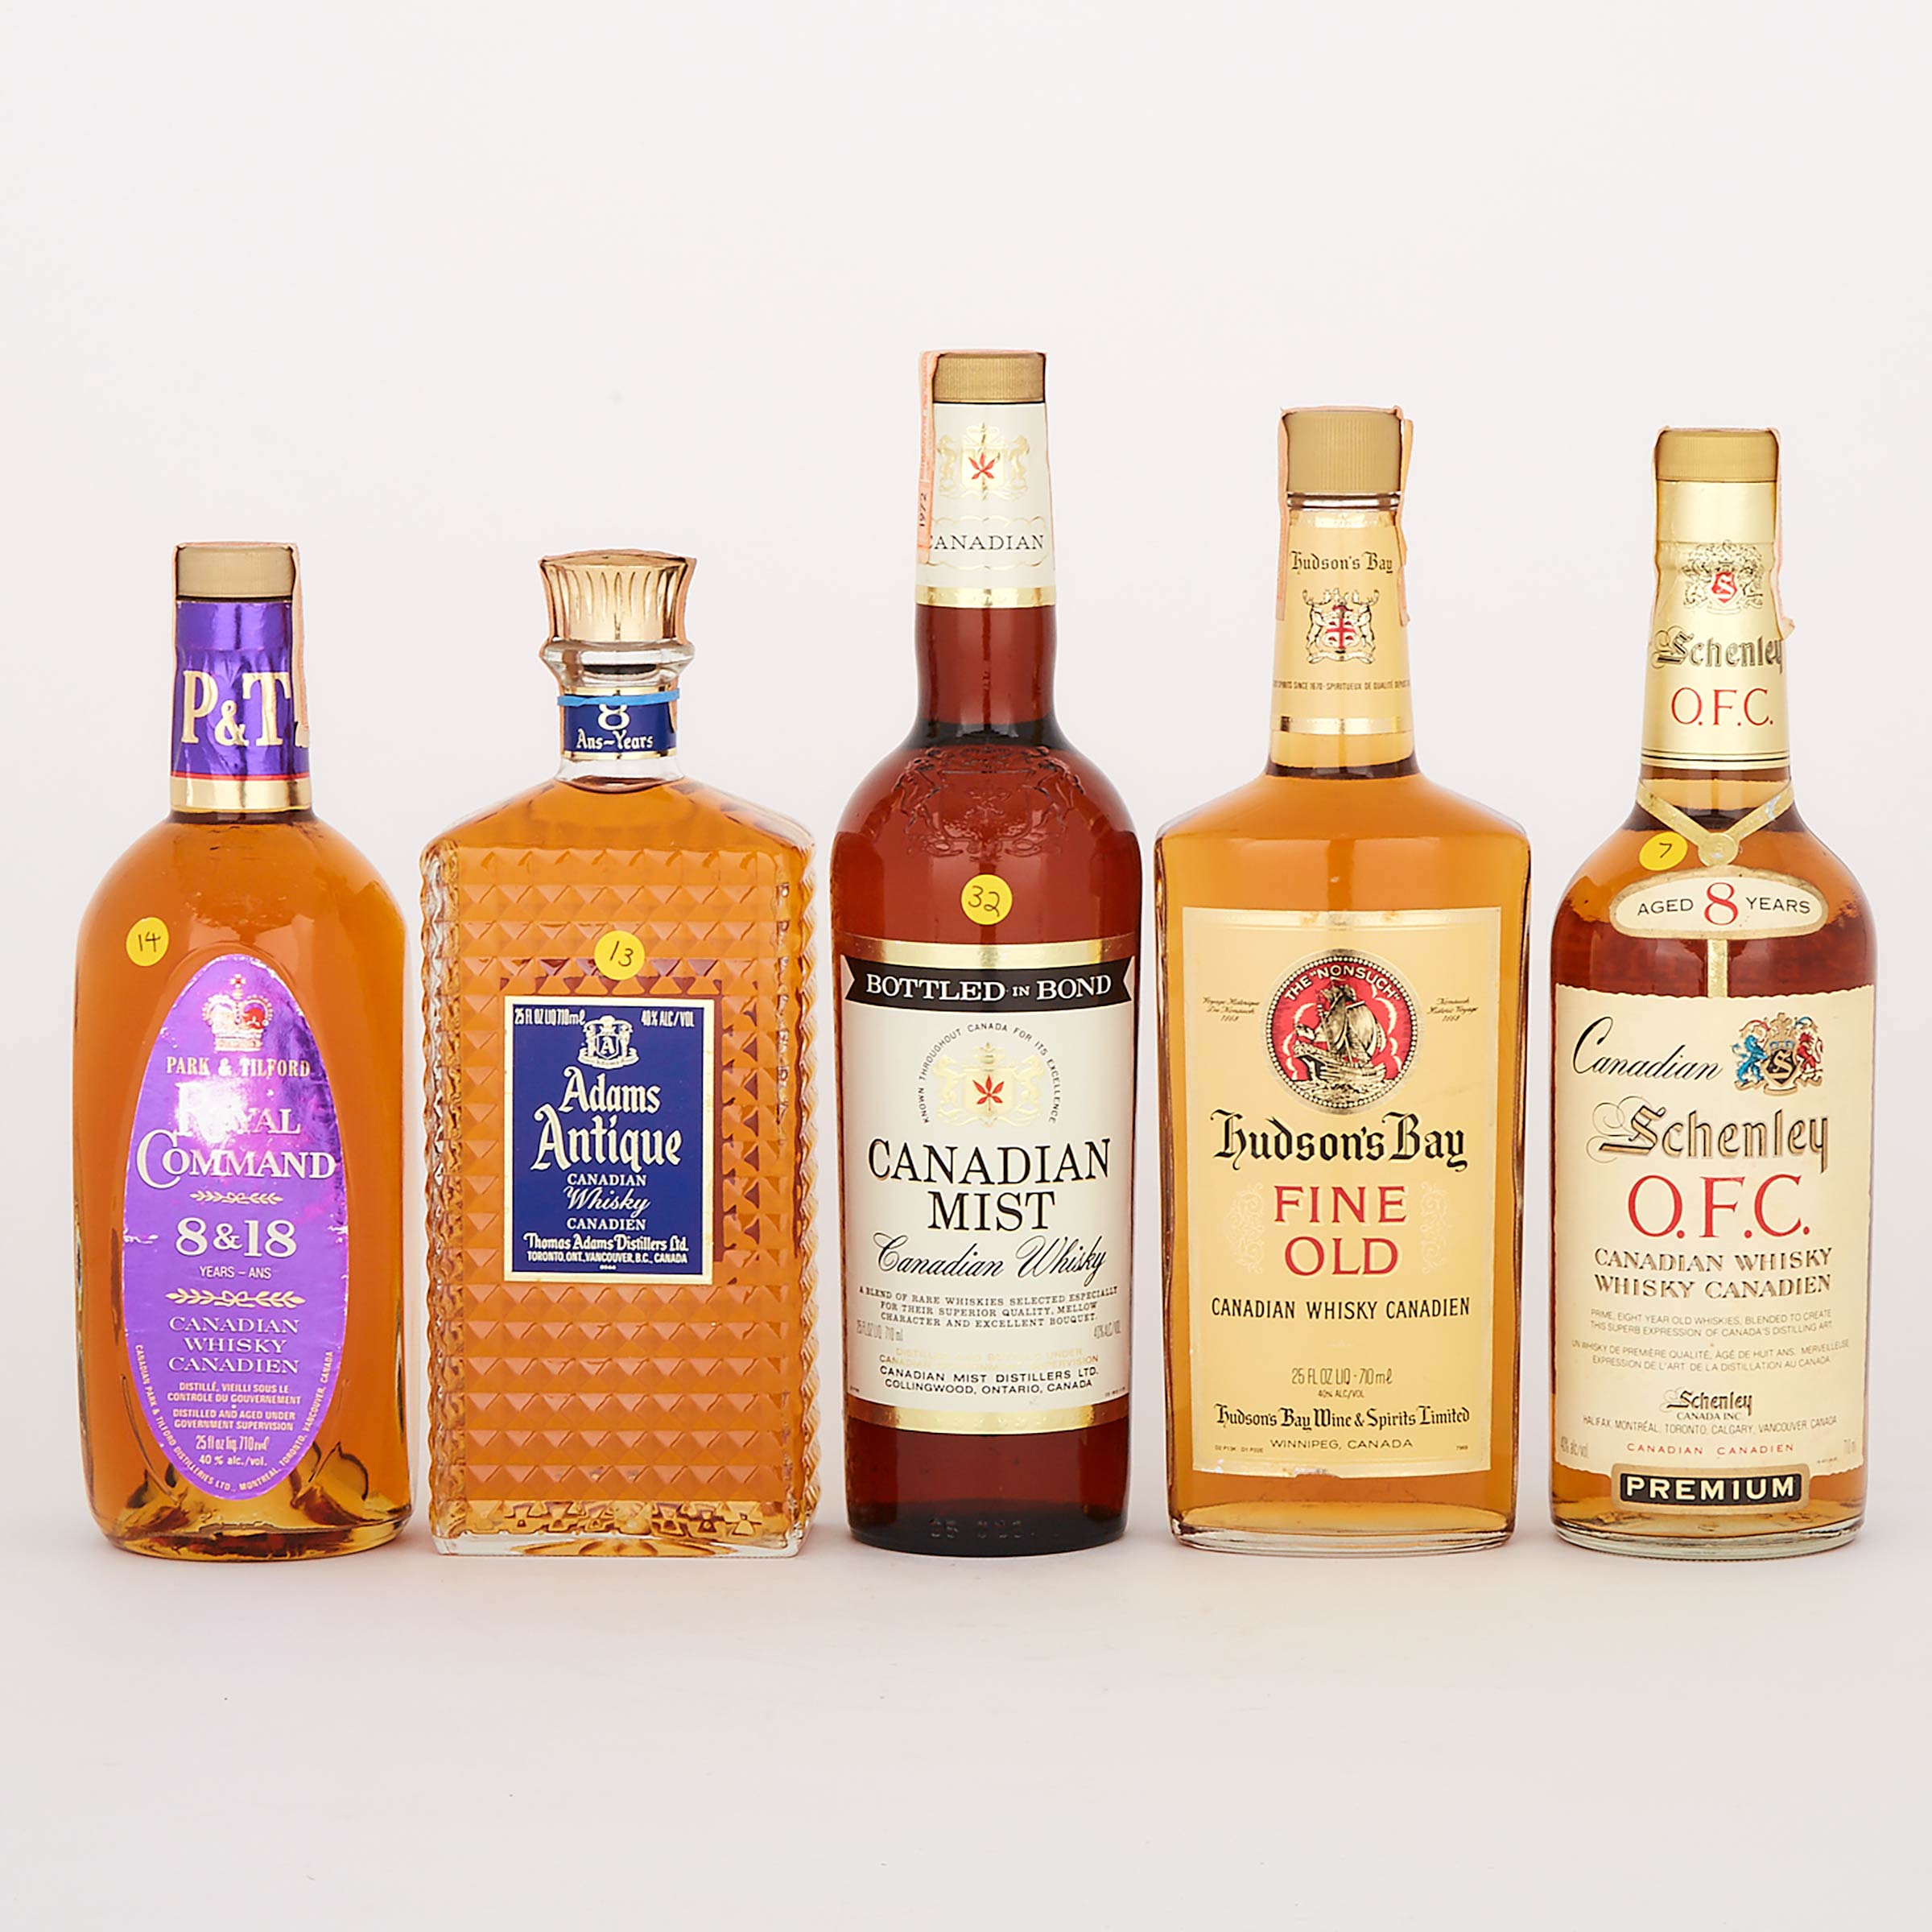 ADAMS ANTIQUE CANADIAN WHISKY 8 YEARS (ONE 710ML)
CANADIAN MIST CANADIAN WHISKY (ONE 710 ML)
HUDSON’S BAY FINE OLD CANADIAN WHISKY (ONE 710 ML)
ROYAL COMMAND 8 & 18 CANADIAN WHISKY (ONE 710 ML)
SCHENLEY PREMIUM CANADIAN WHISKY OFC 8 YEARS (ONE 710 ML)